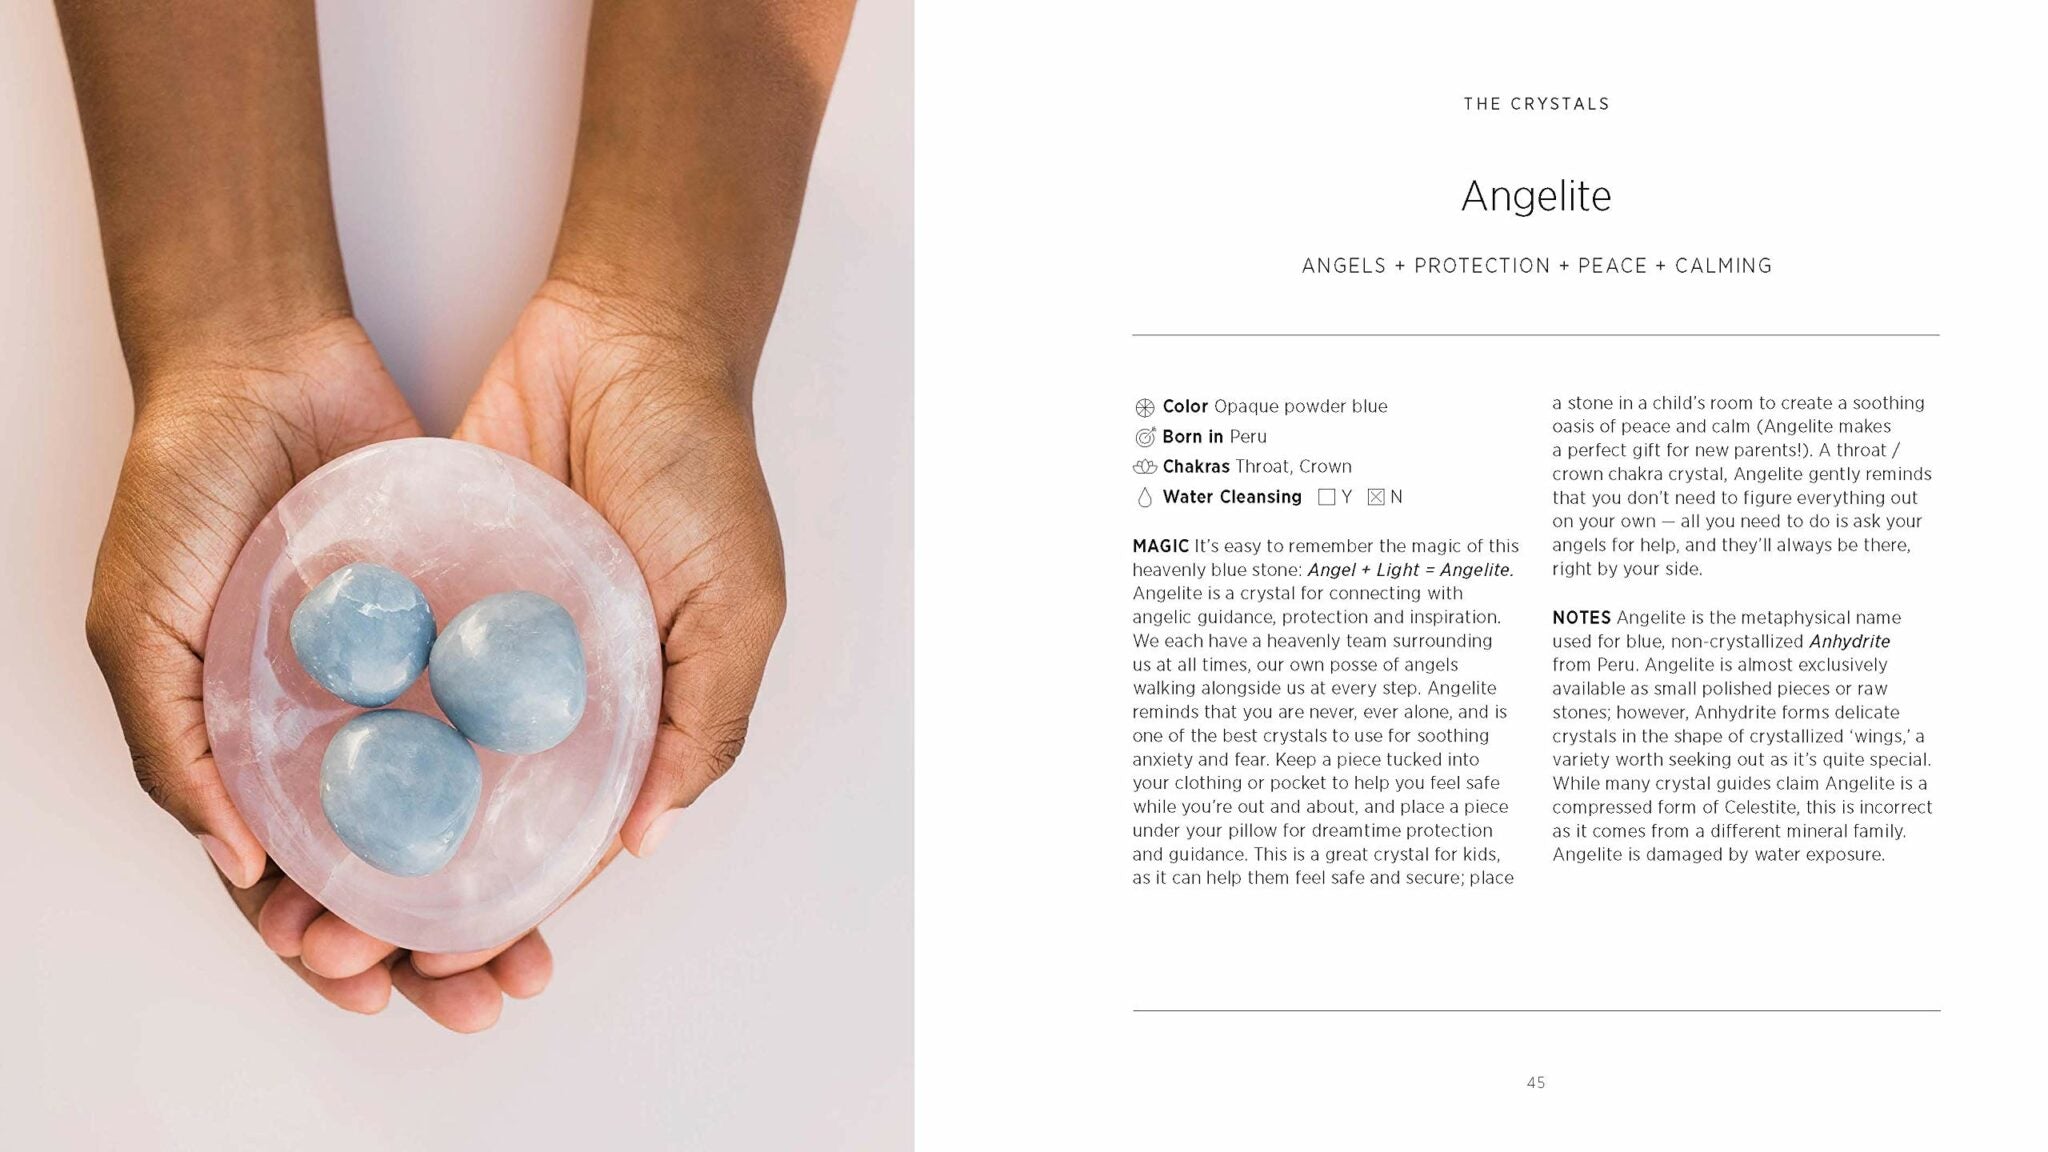 Crystallize - The Modern Guide to Crystal Healing